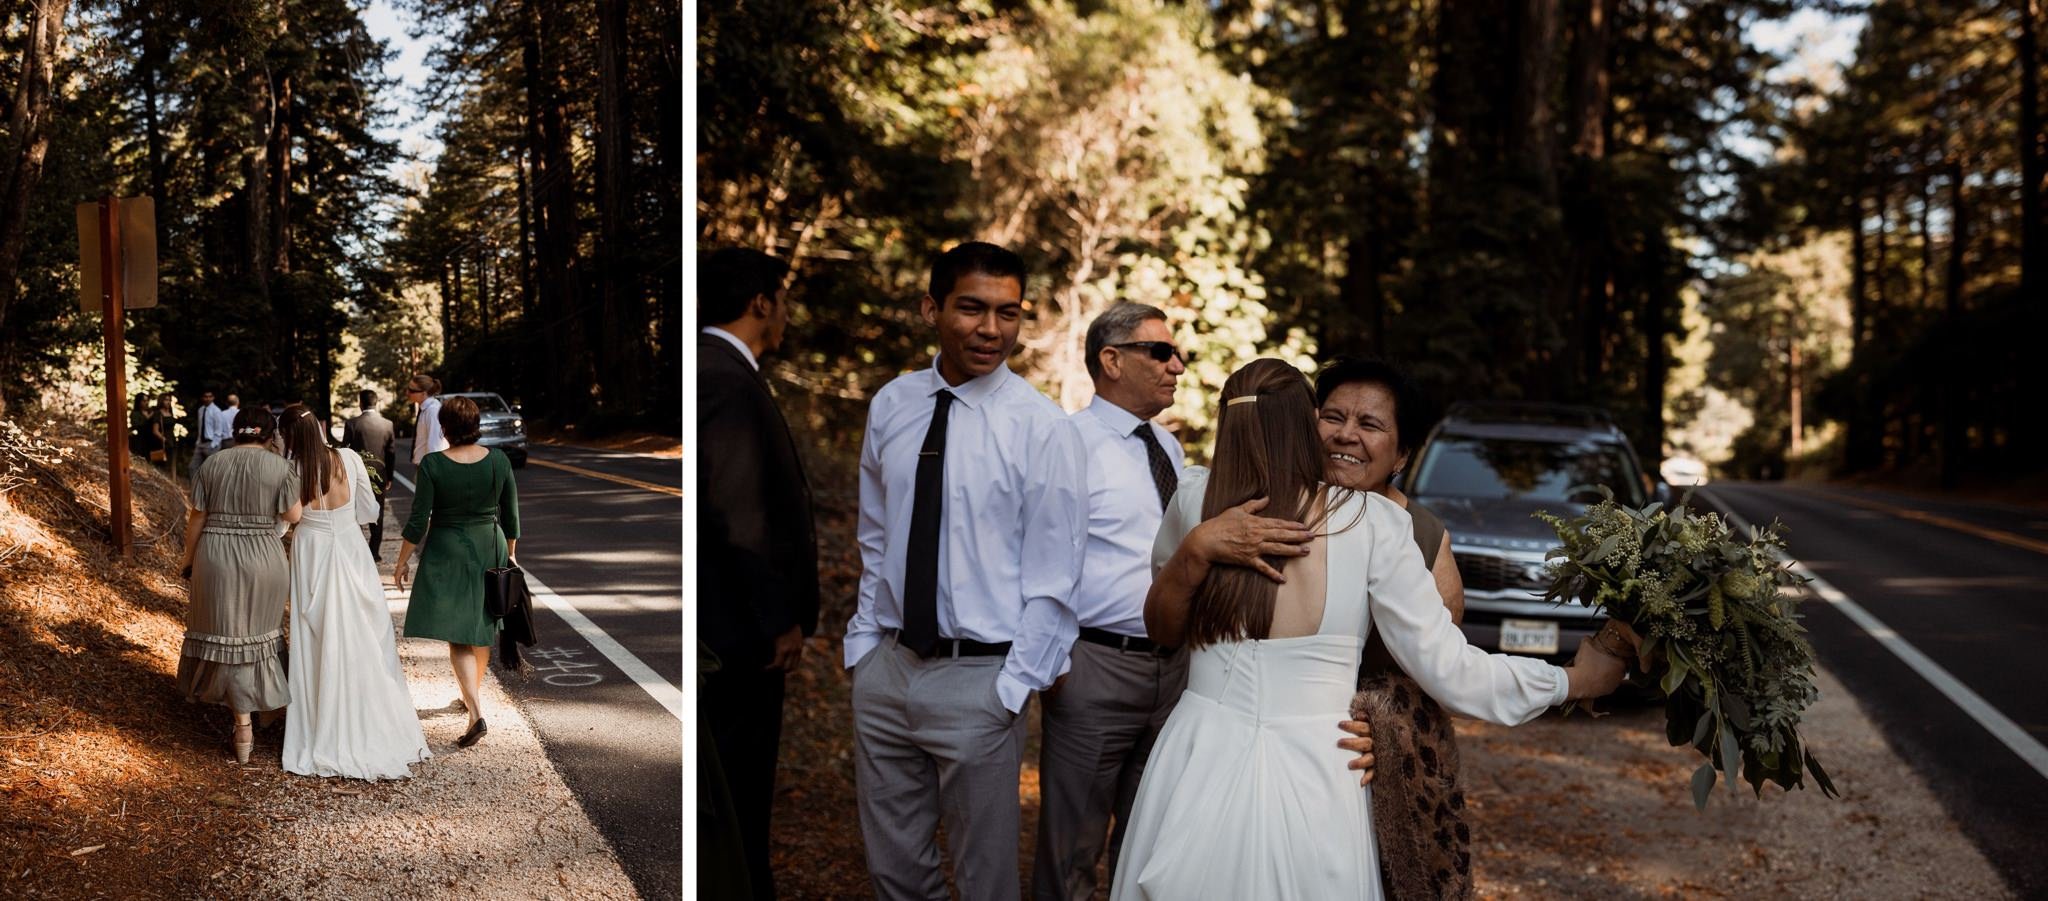 033_Two-Day Big Sur Redwoods Elopement with Family_Will Khoury Elopement Photographer.jpg